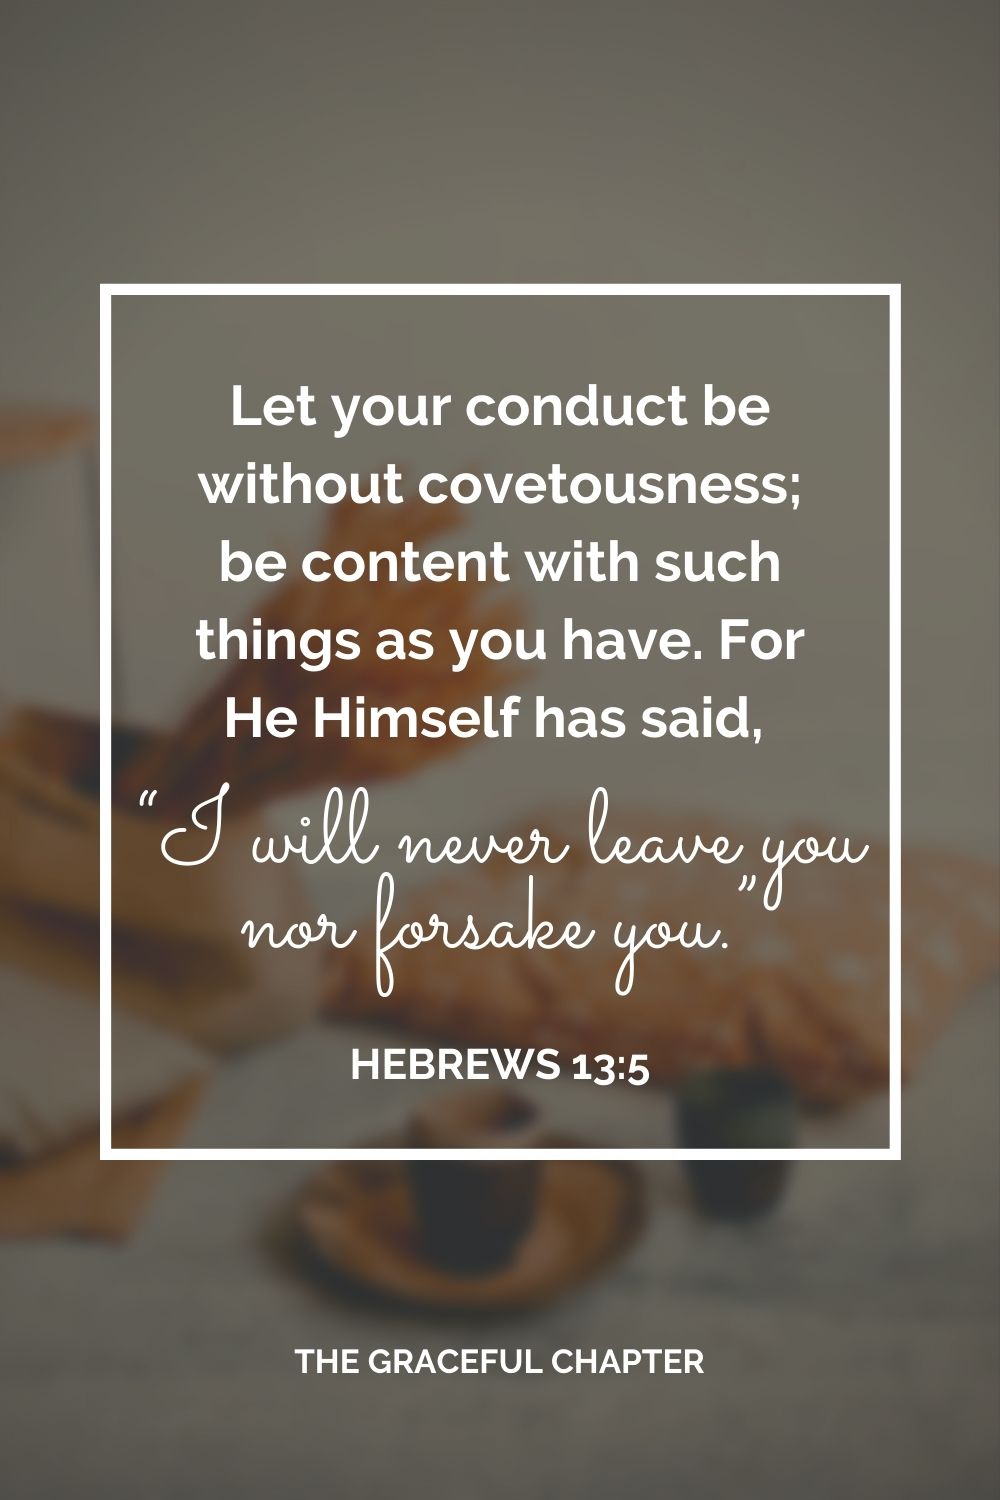 Let your conduct be without covetousness; be content with such things as you have. For He Himself has said, “I will never leave you nor forsake you.” Hebrews 13:5